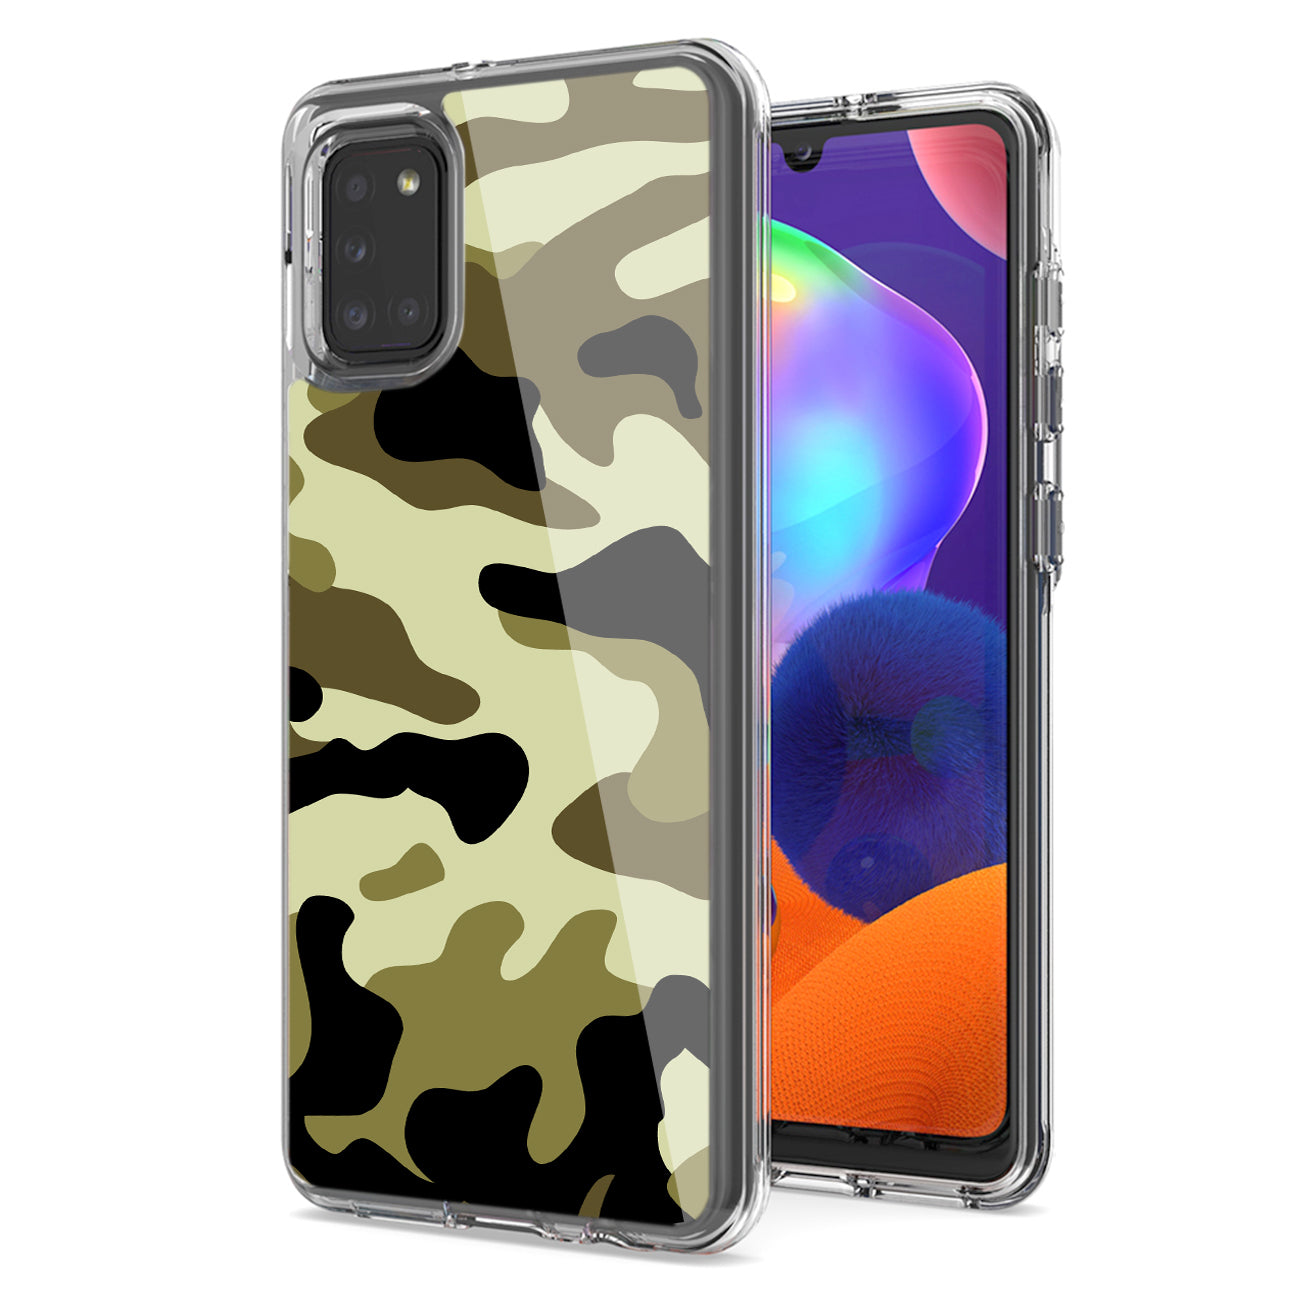 Camouflage Dual Layer Hybrid Hard & Soft TPU Rubber Case for SAMS GALAXY A31 In Green